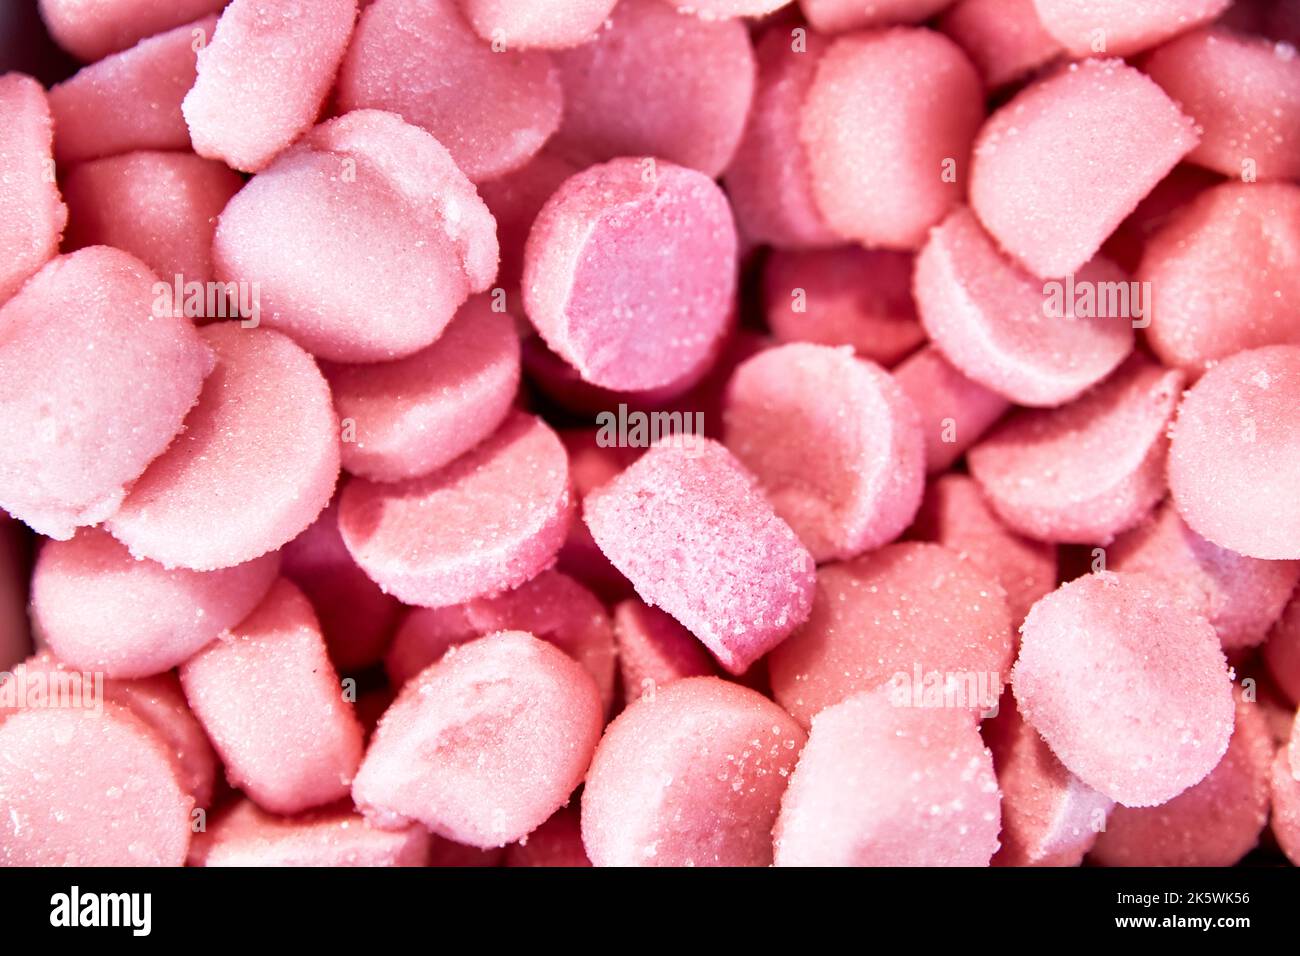 Background of strawberry jelly beans. Unhealthy food. sweets and desserts Stock Photo